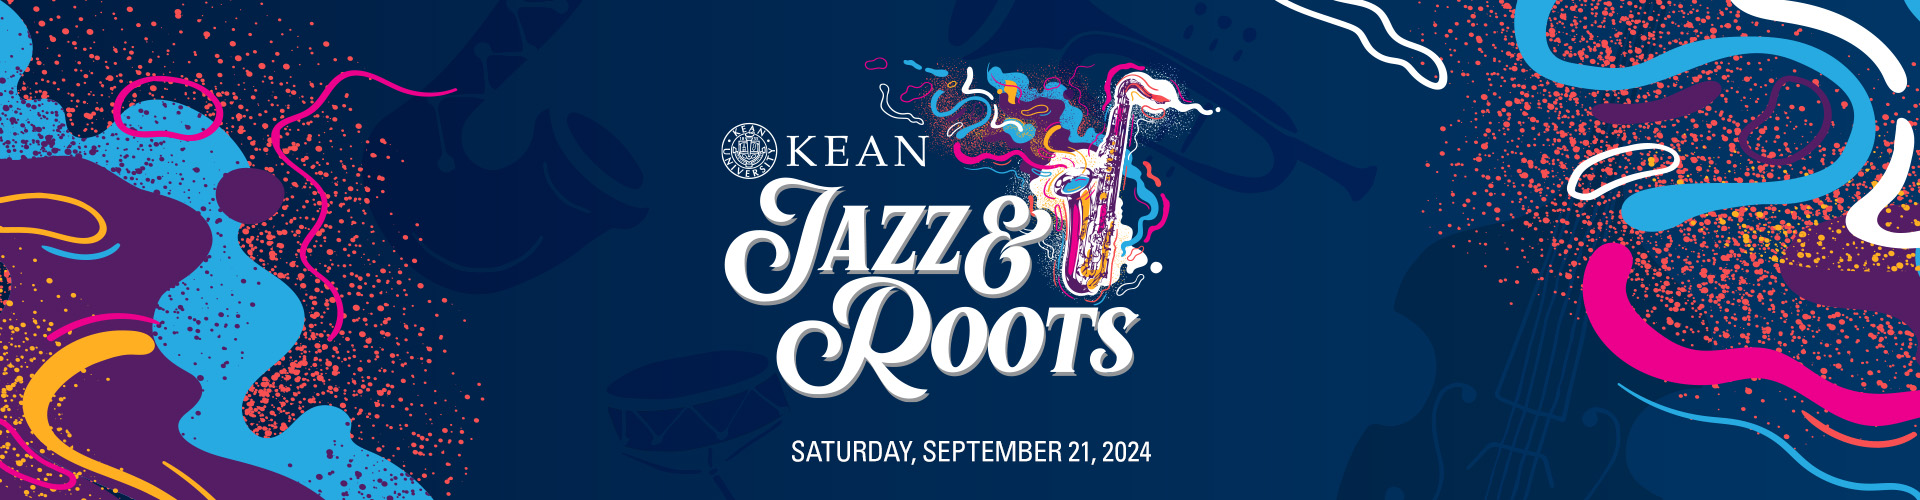 Jazz and Roots Musical Festival